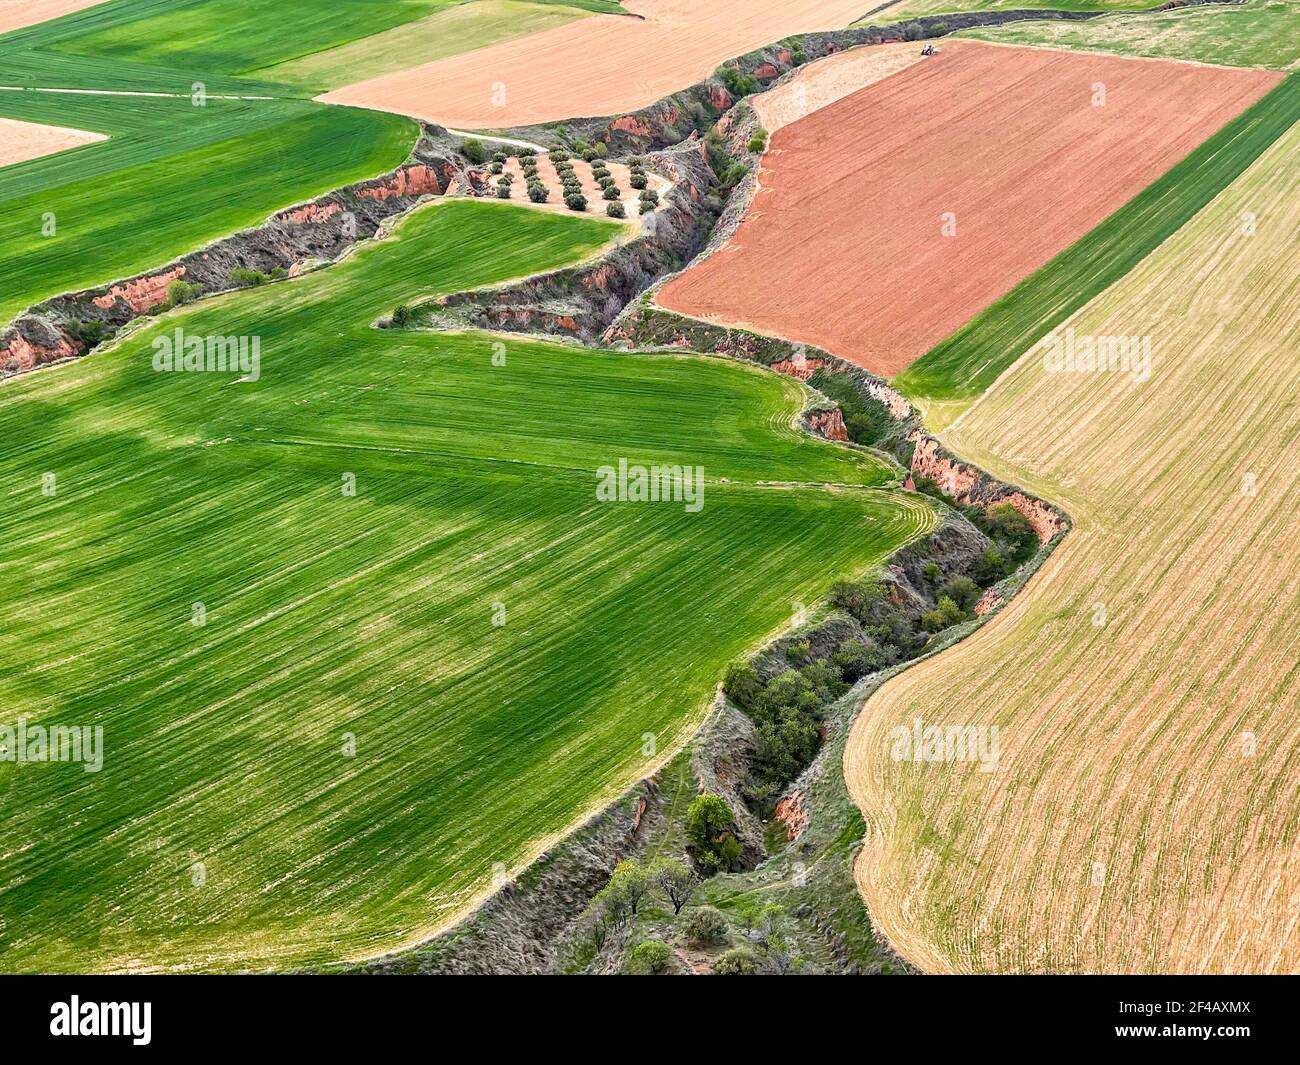 aerial view of recently planted cereal crops, separated by furrows created by soil erosion, horizontal Stock Photo